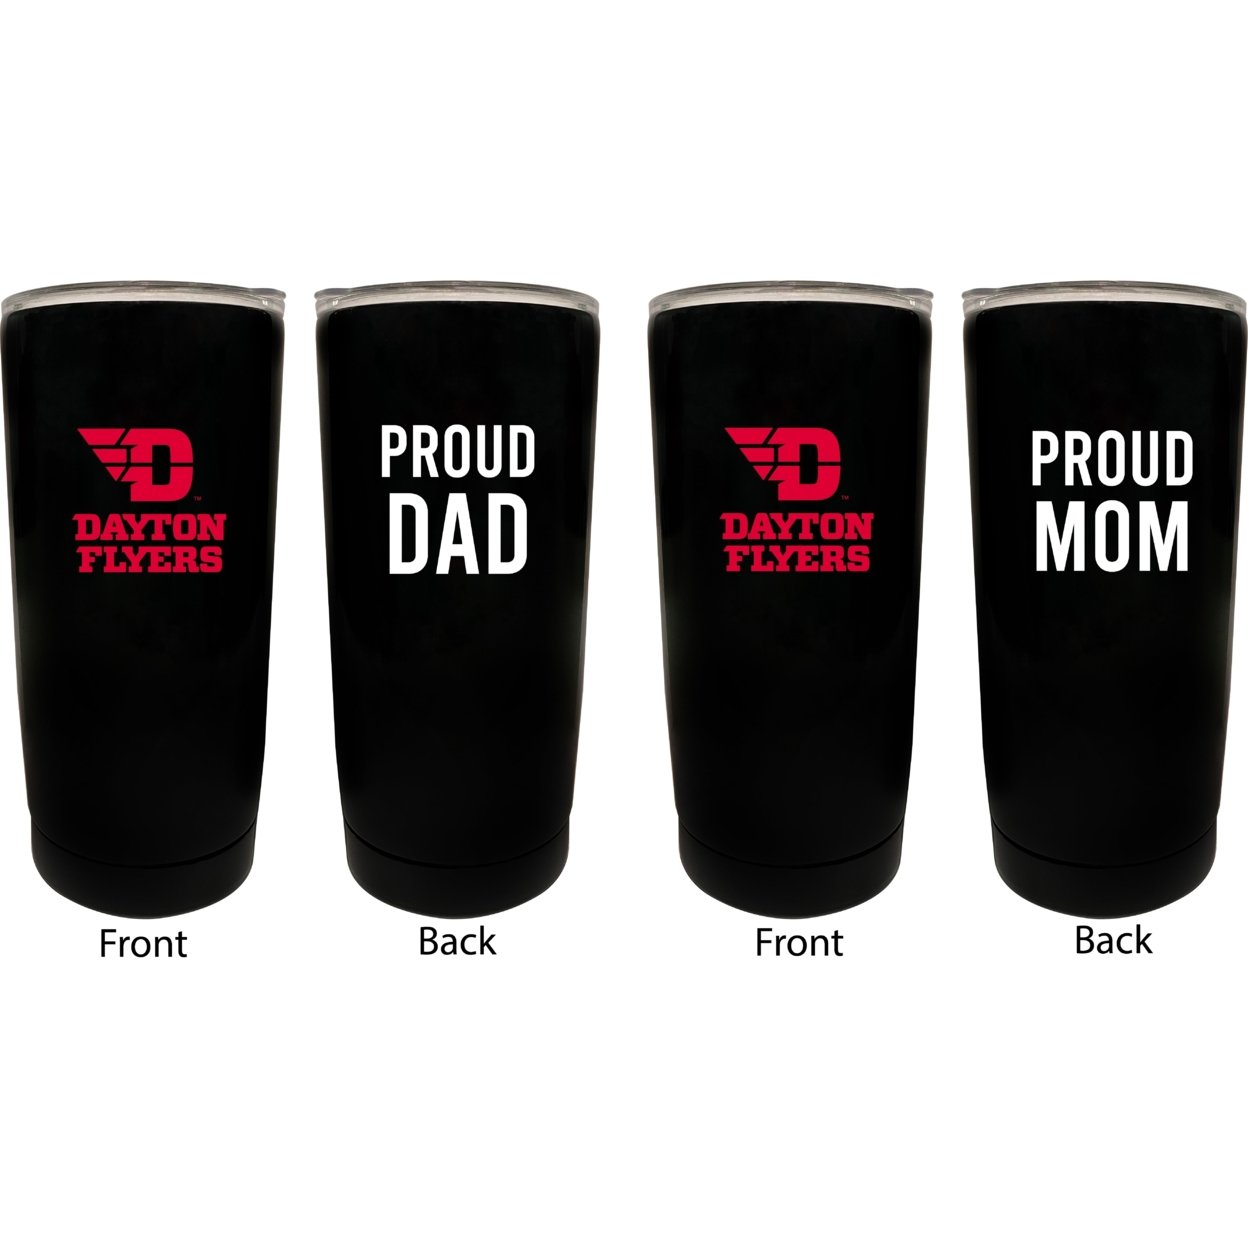 Dayton Flyers Proud Mom And Dad 16 Oz Insulated Stainless Steel Tumblers 2 Pack Black.